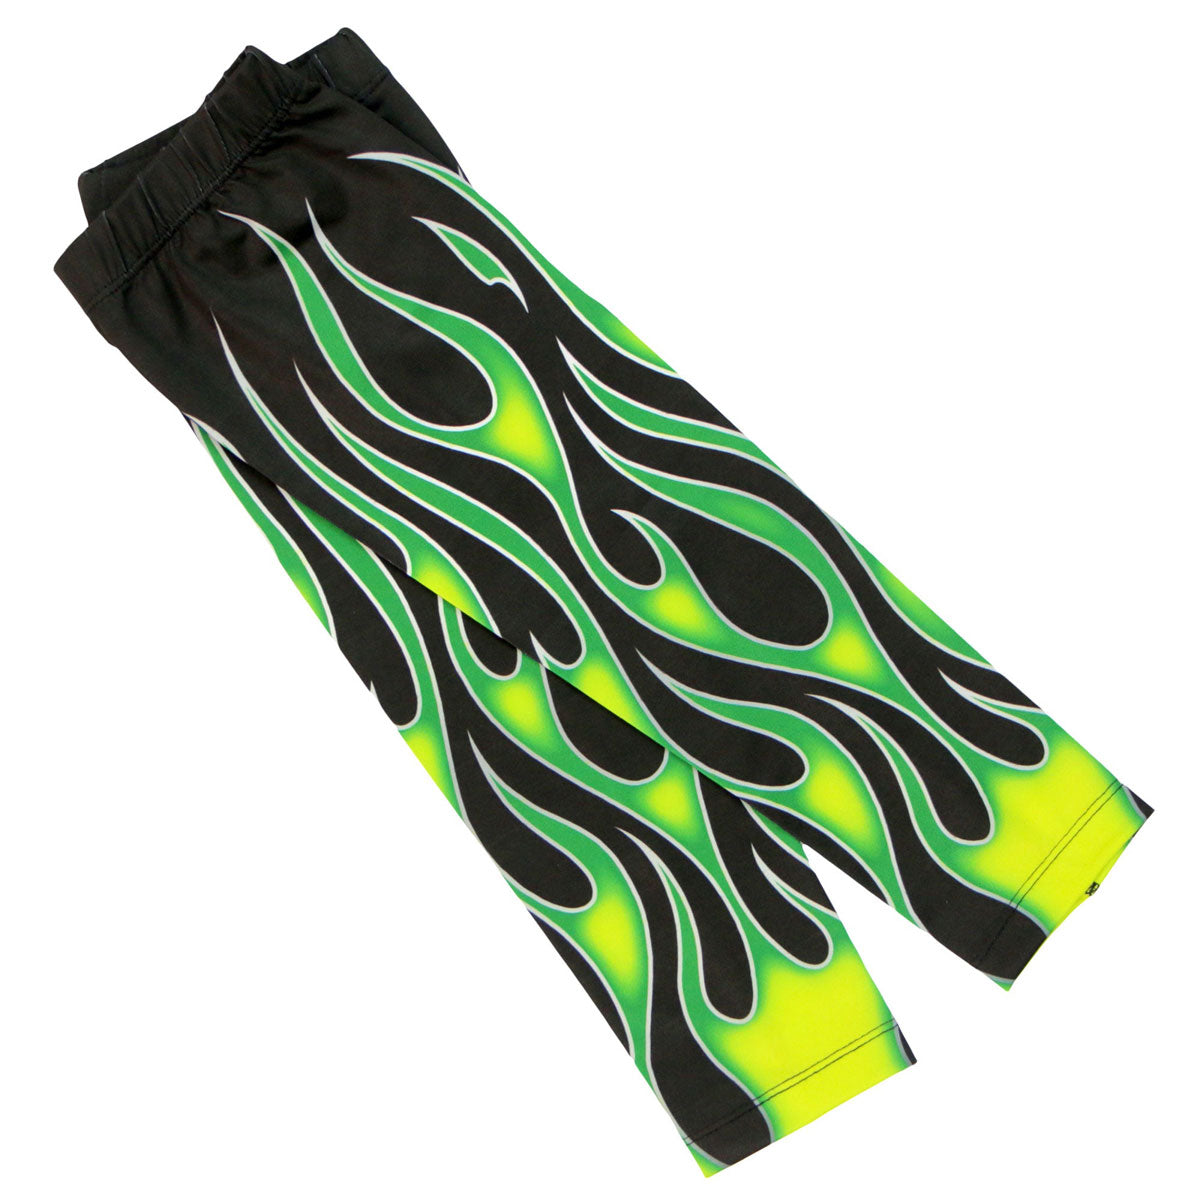 Hot Leathers ARM1006 Flames Green Arm Sleeve